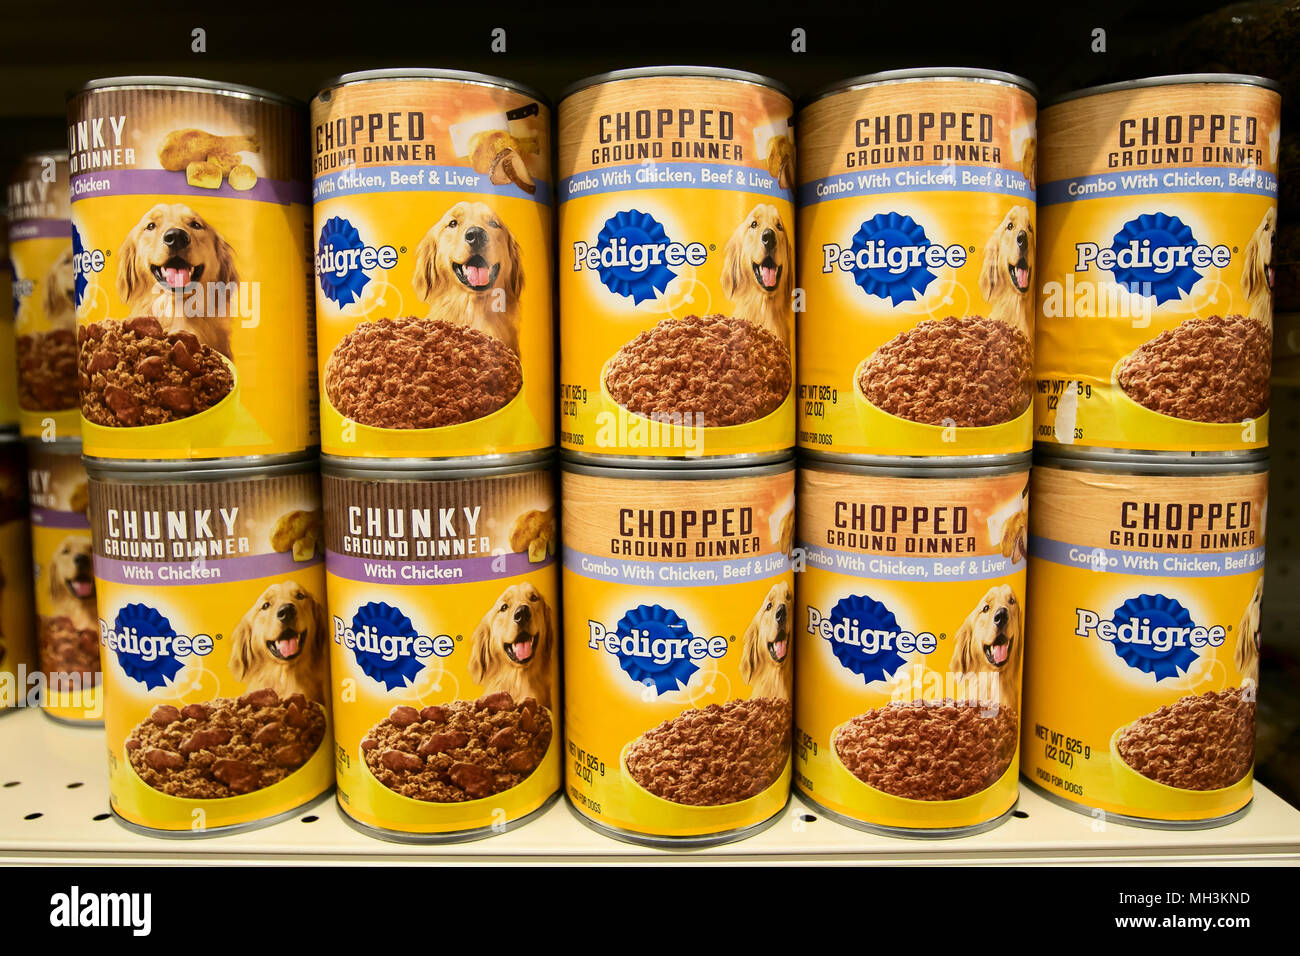 Holetown, Barbados, 03-19-2018: Cans of Pedigree dog food stand on a shelf of a supermarket. Stock Photo